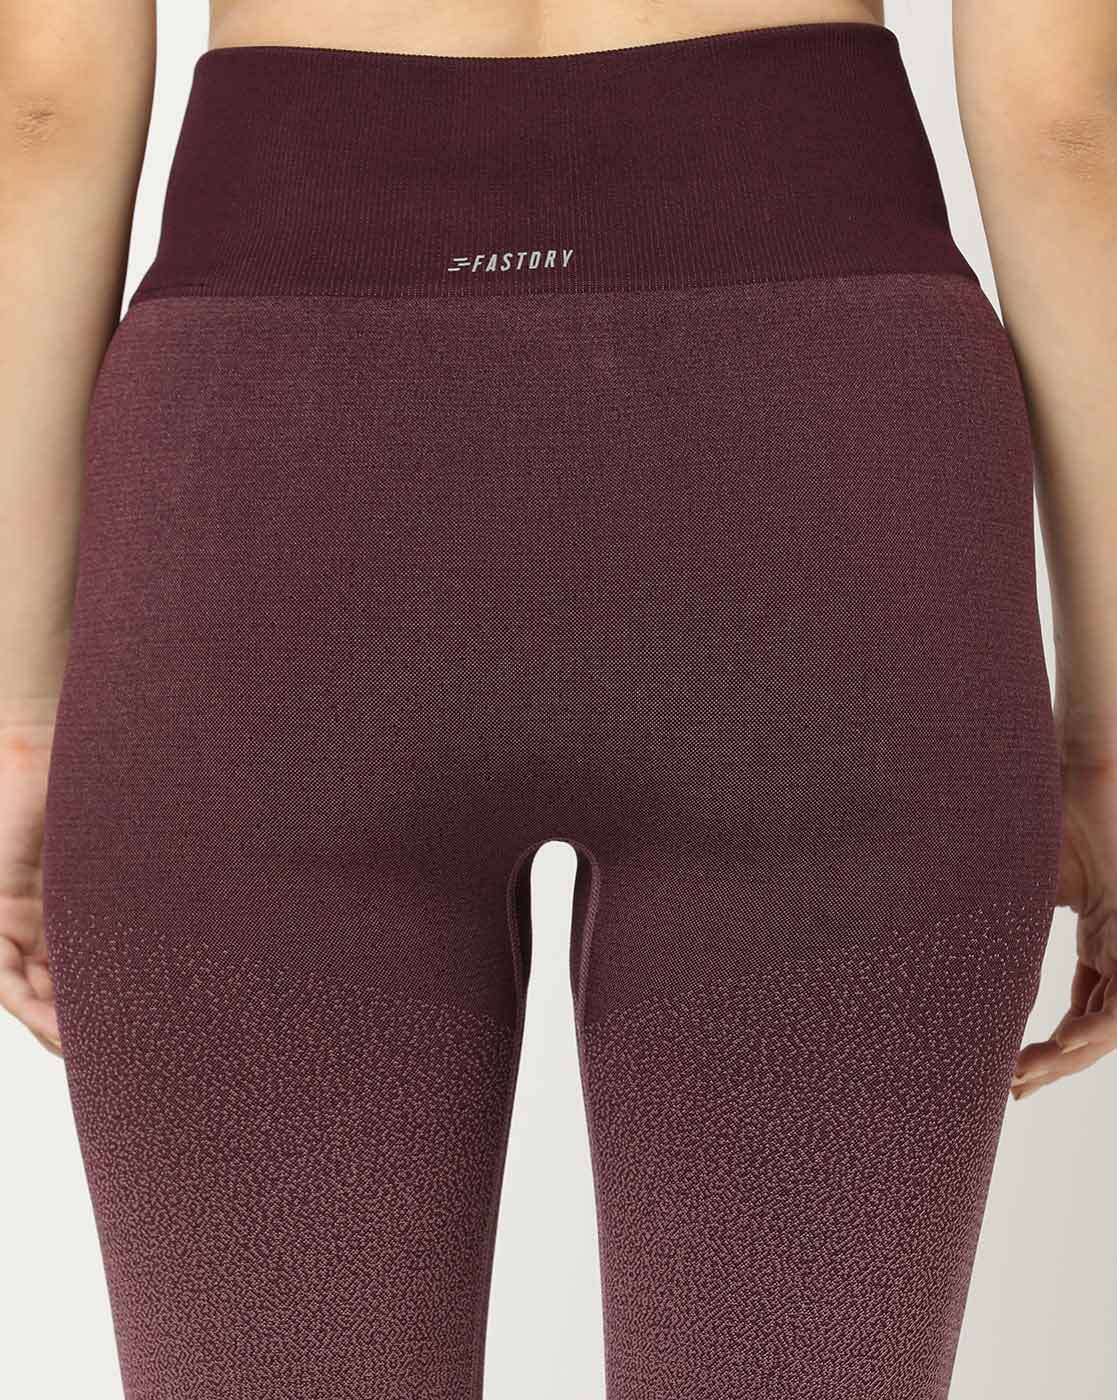 Gym Glamour  Seamless Leggings – Violet Ombre